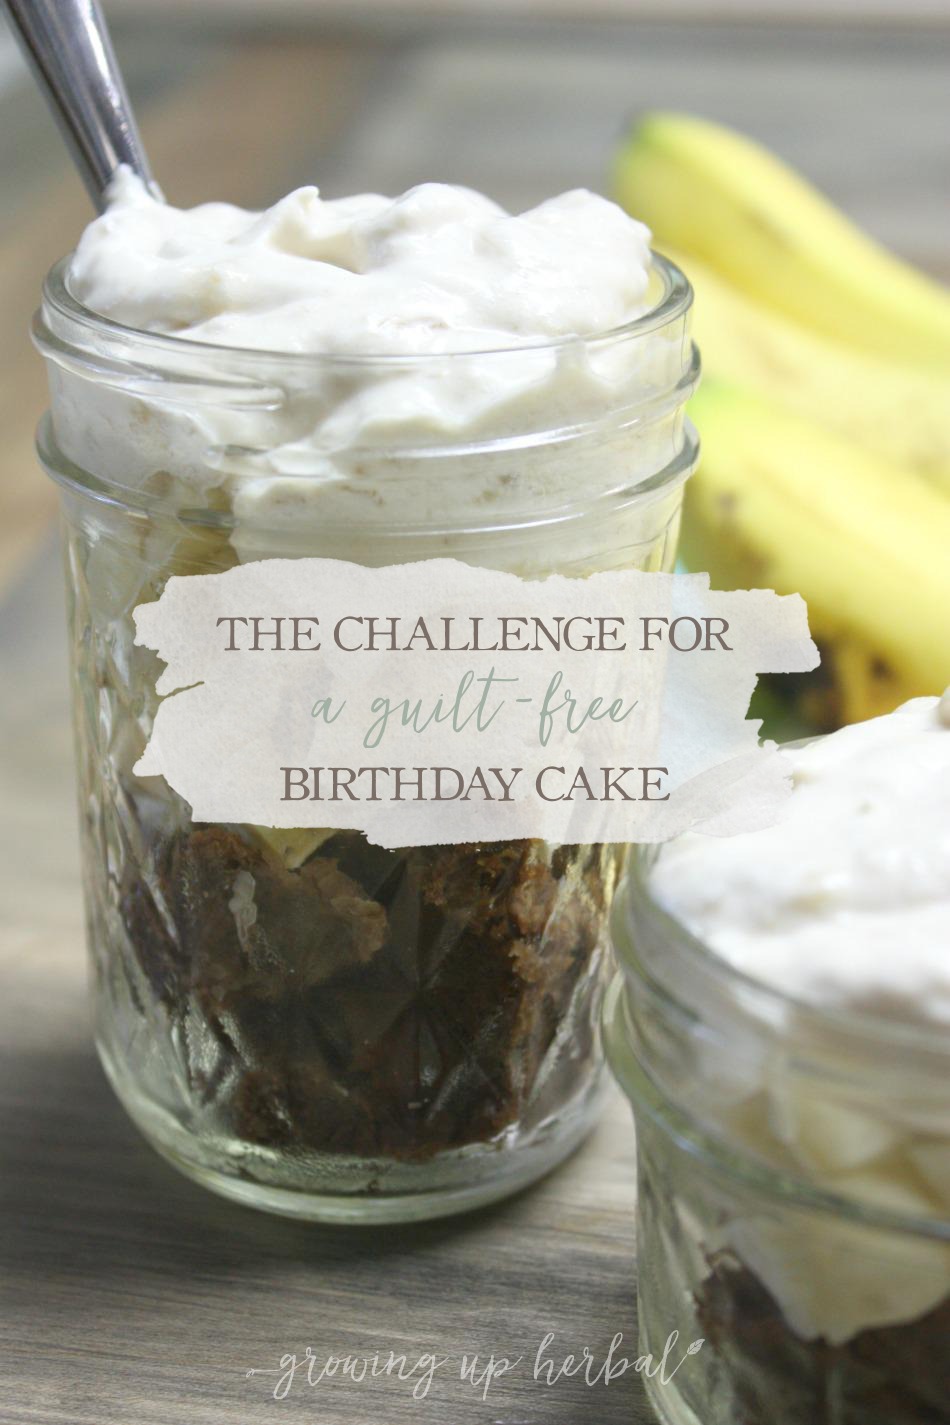 The Challenge For A Guilt-Free Birthday Cake | Growing Up Herbal | Get the recipe for my Chocolate Banana Cake with Banana Whipped Cream (a gluten-free, sugar-free birthday cake) that tastes great!